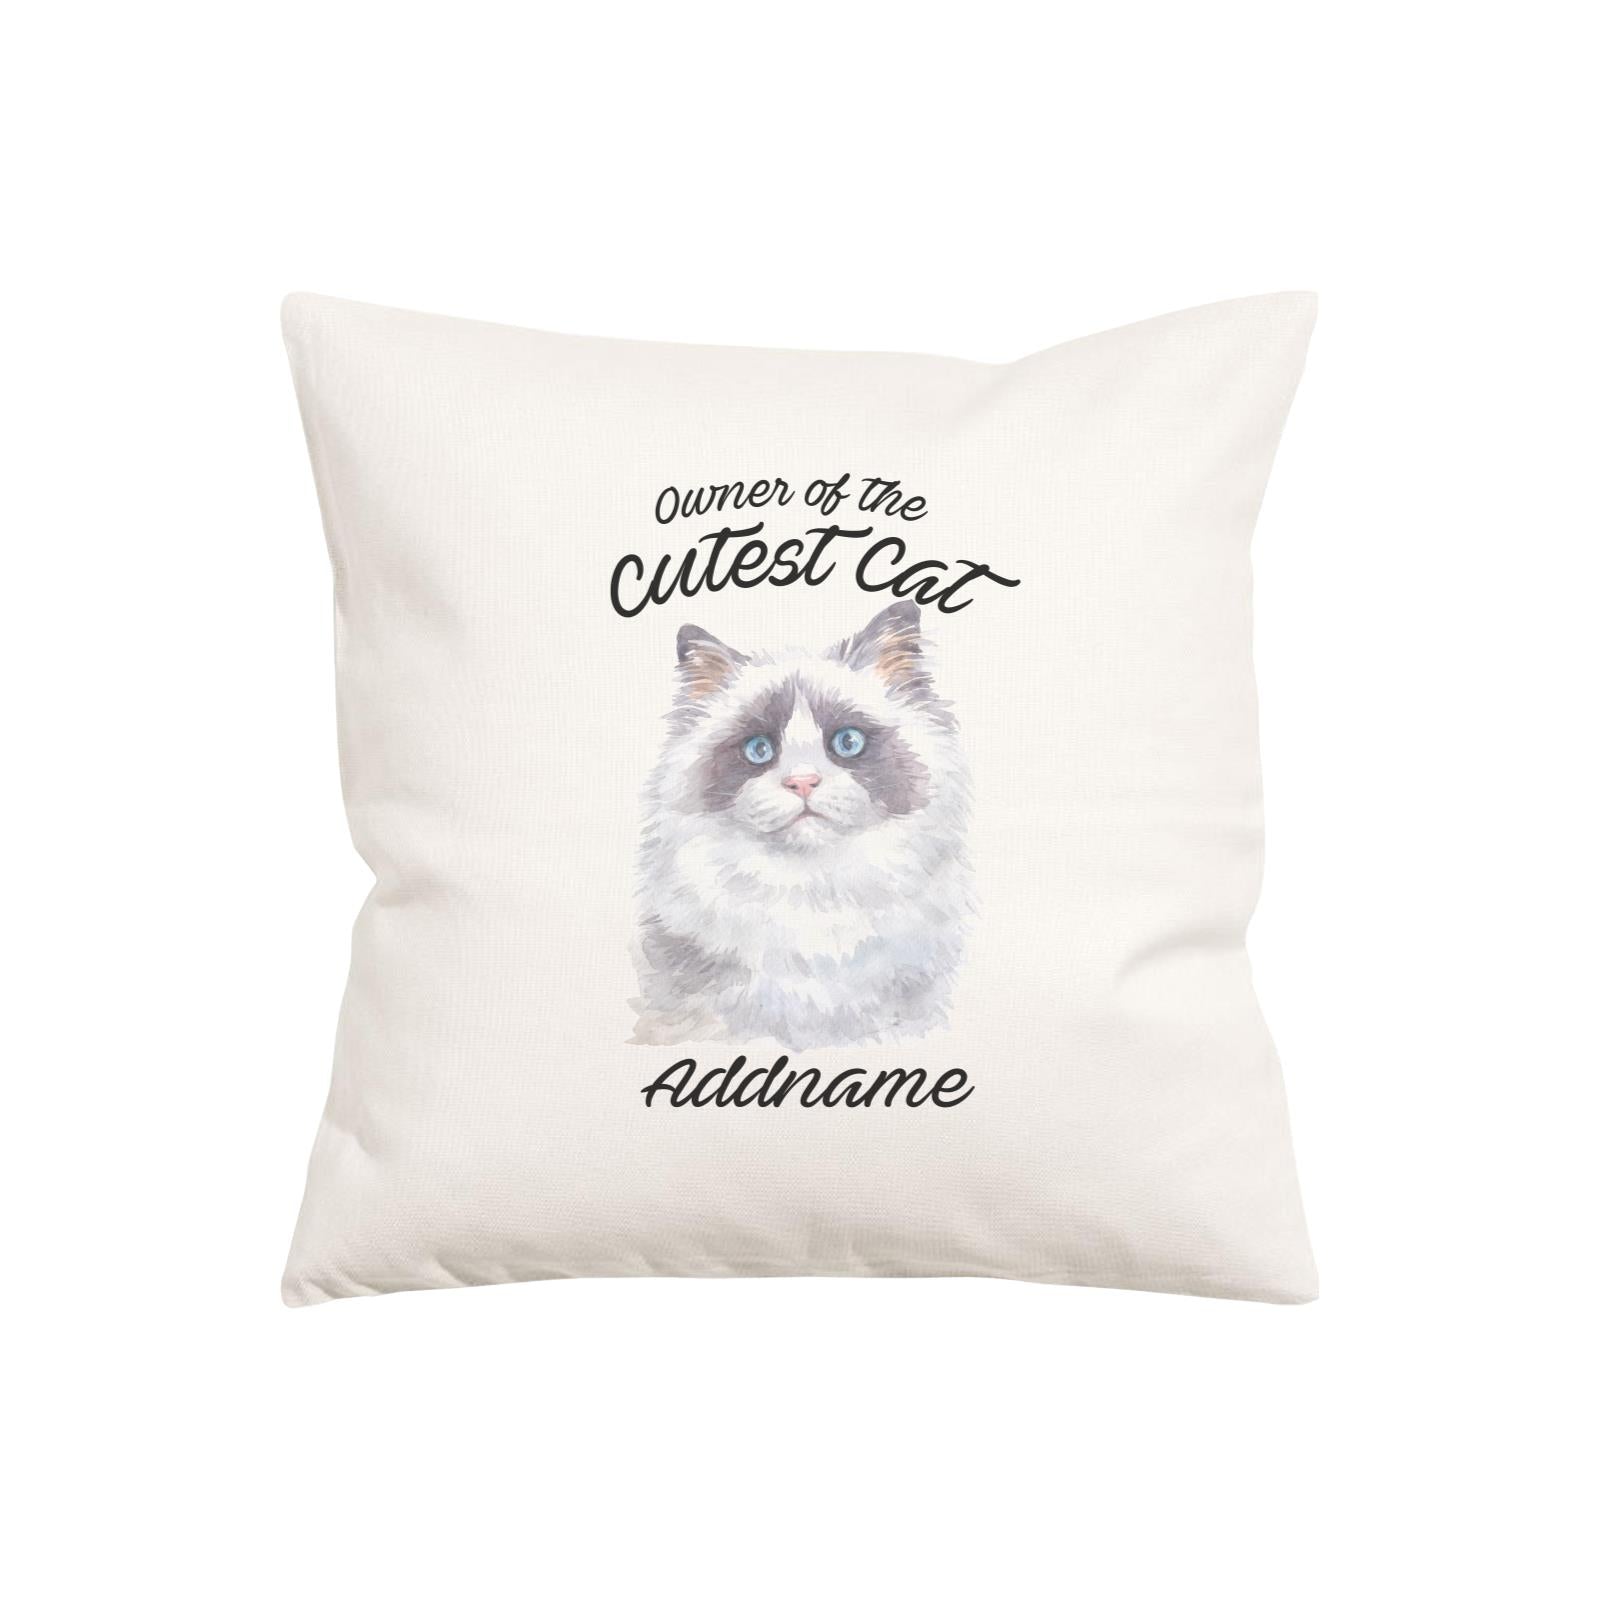 Watercolor Owner Of The Cutest Cat Ragdoll Cat Addname Pillow Cushion